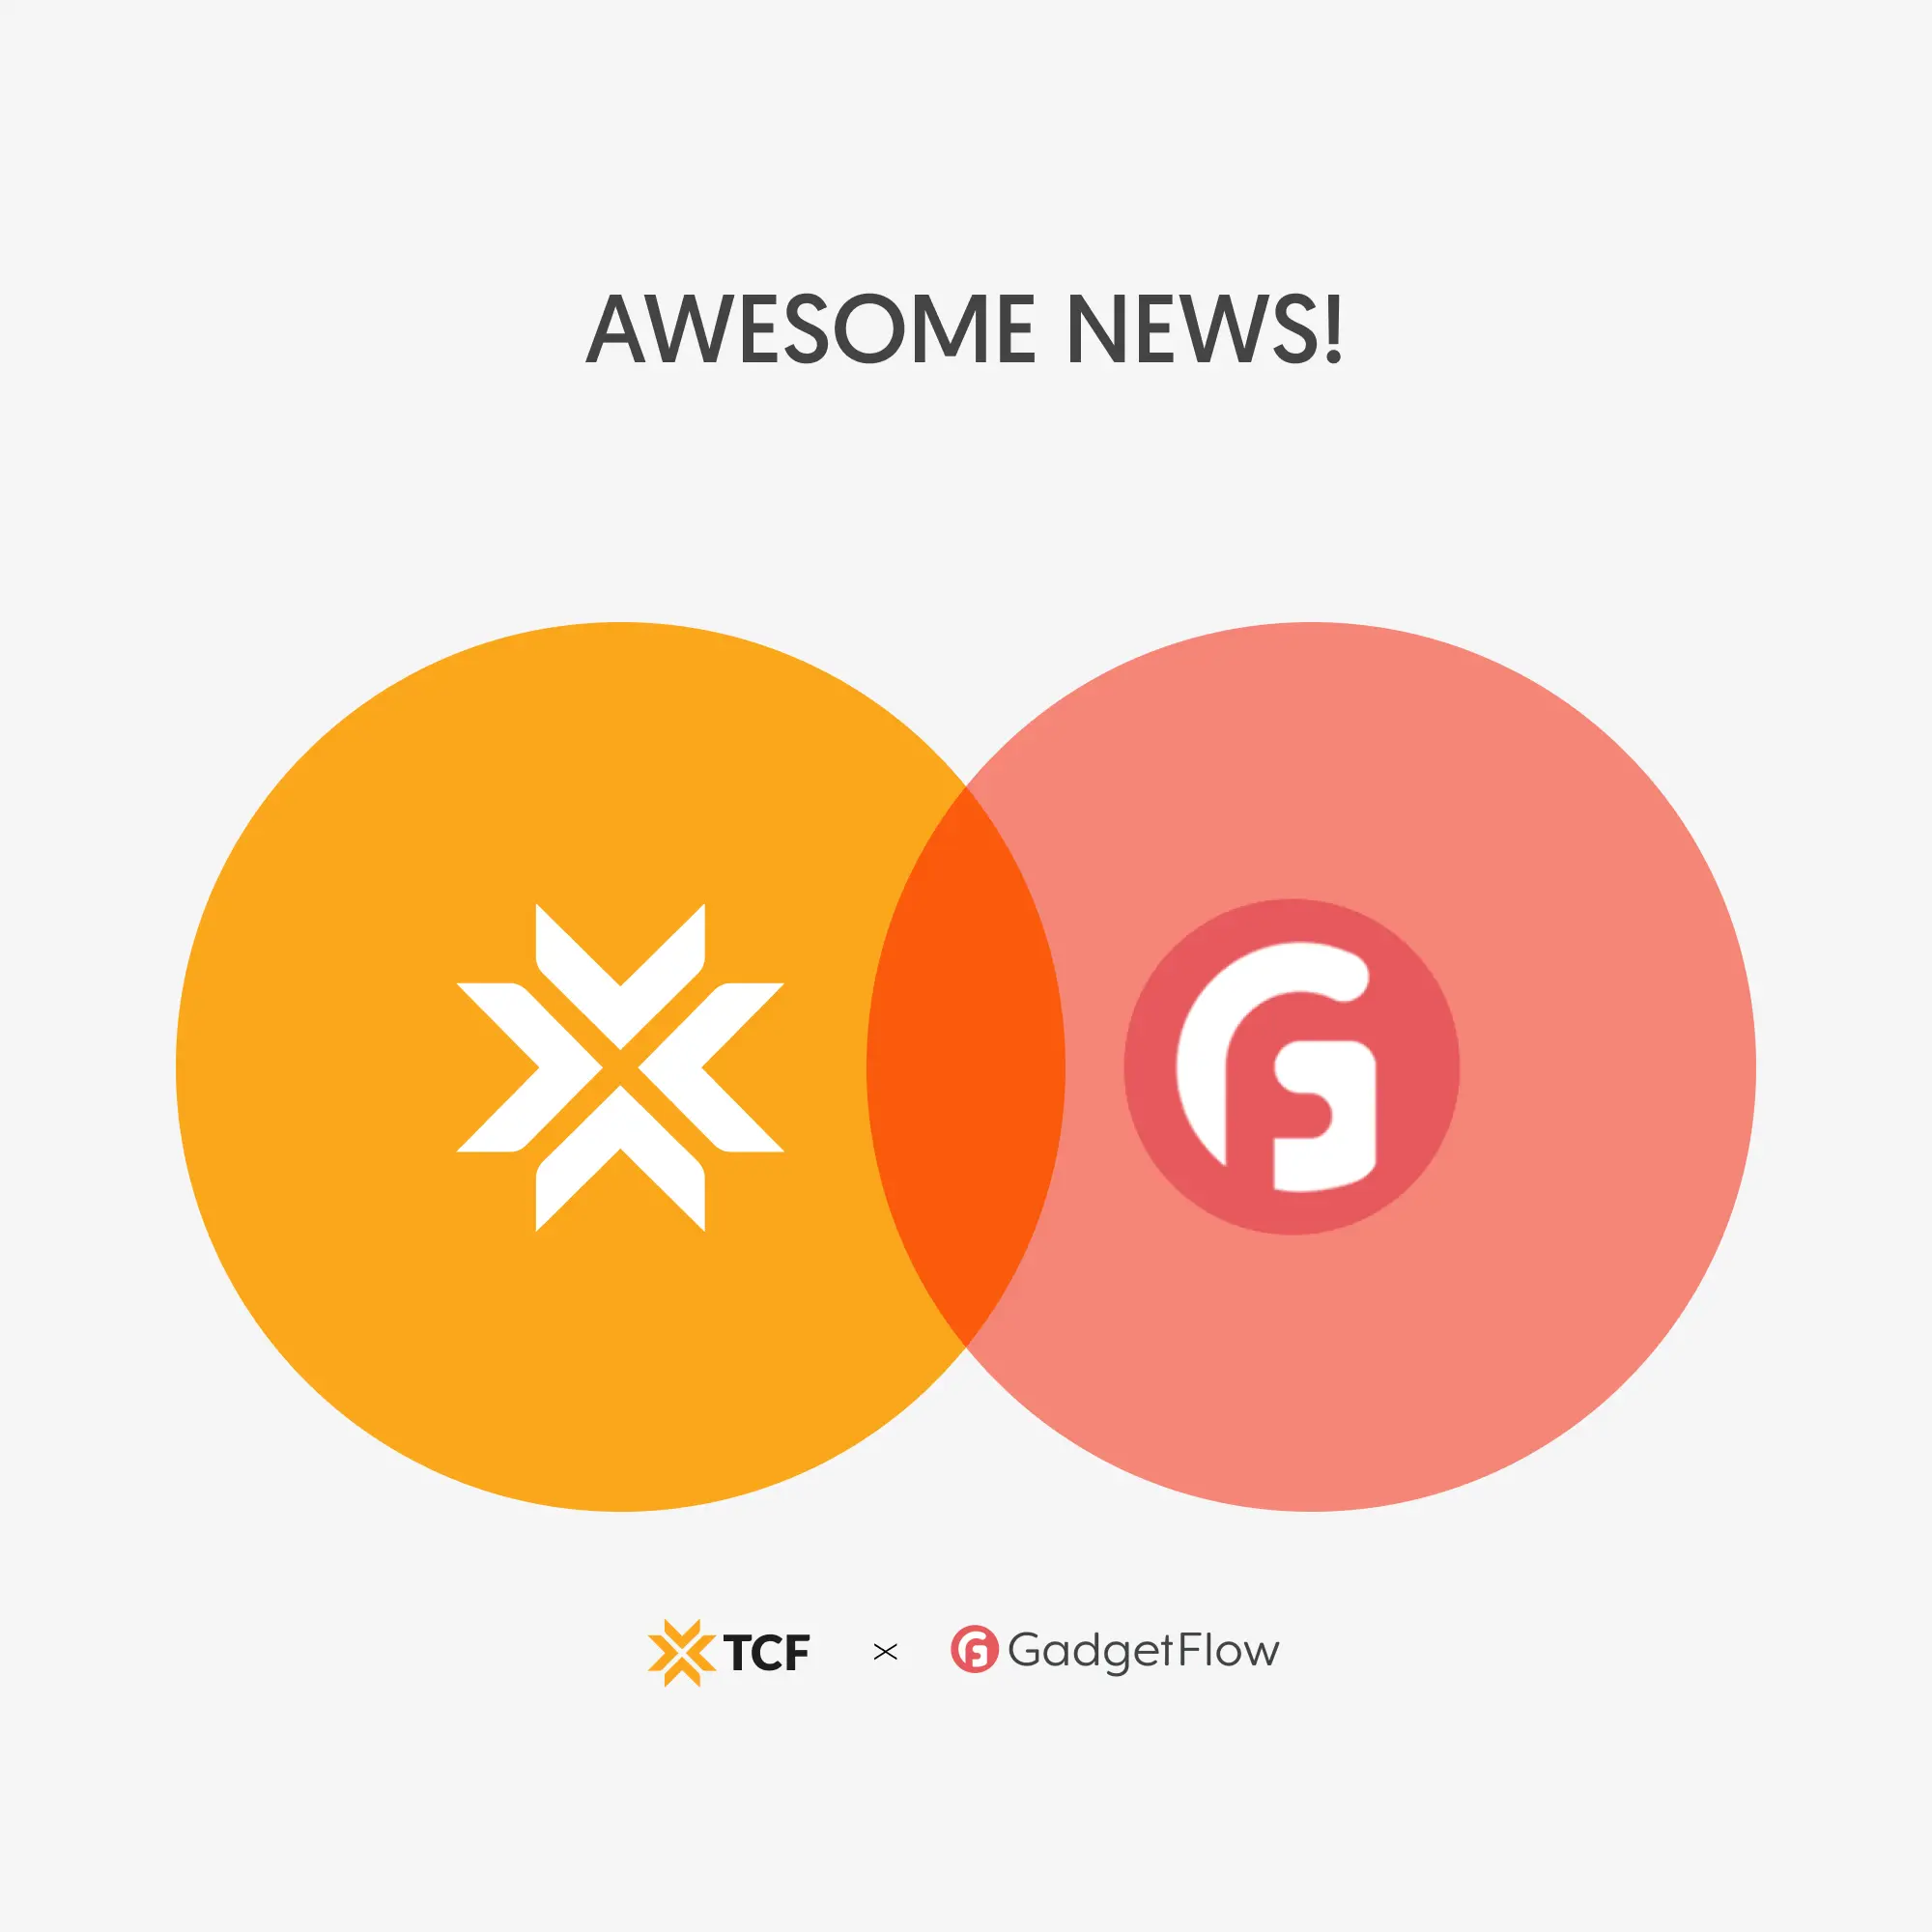 TCF Acquires Gadget Flow: What It Means for Creators and Brands